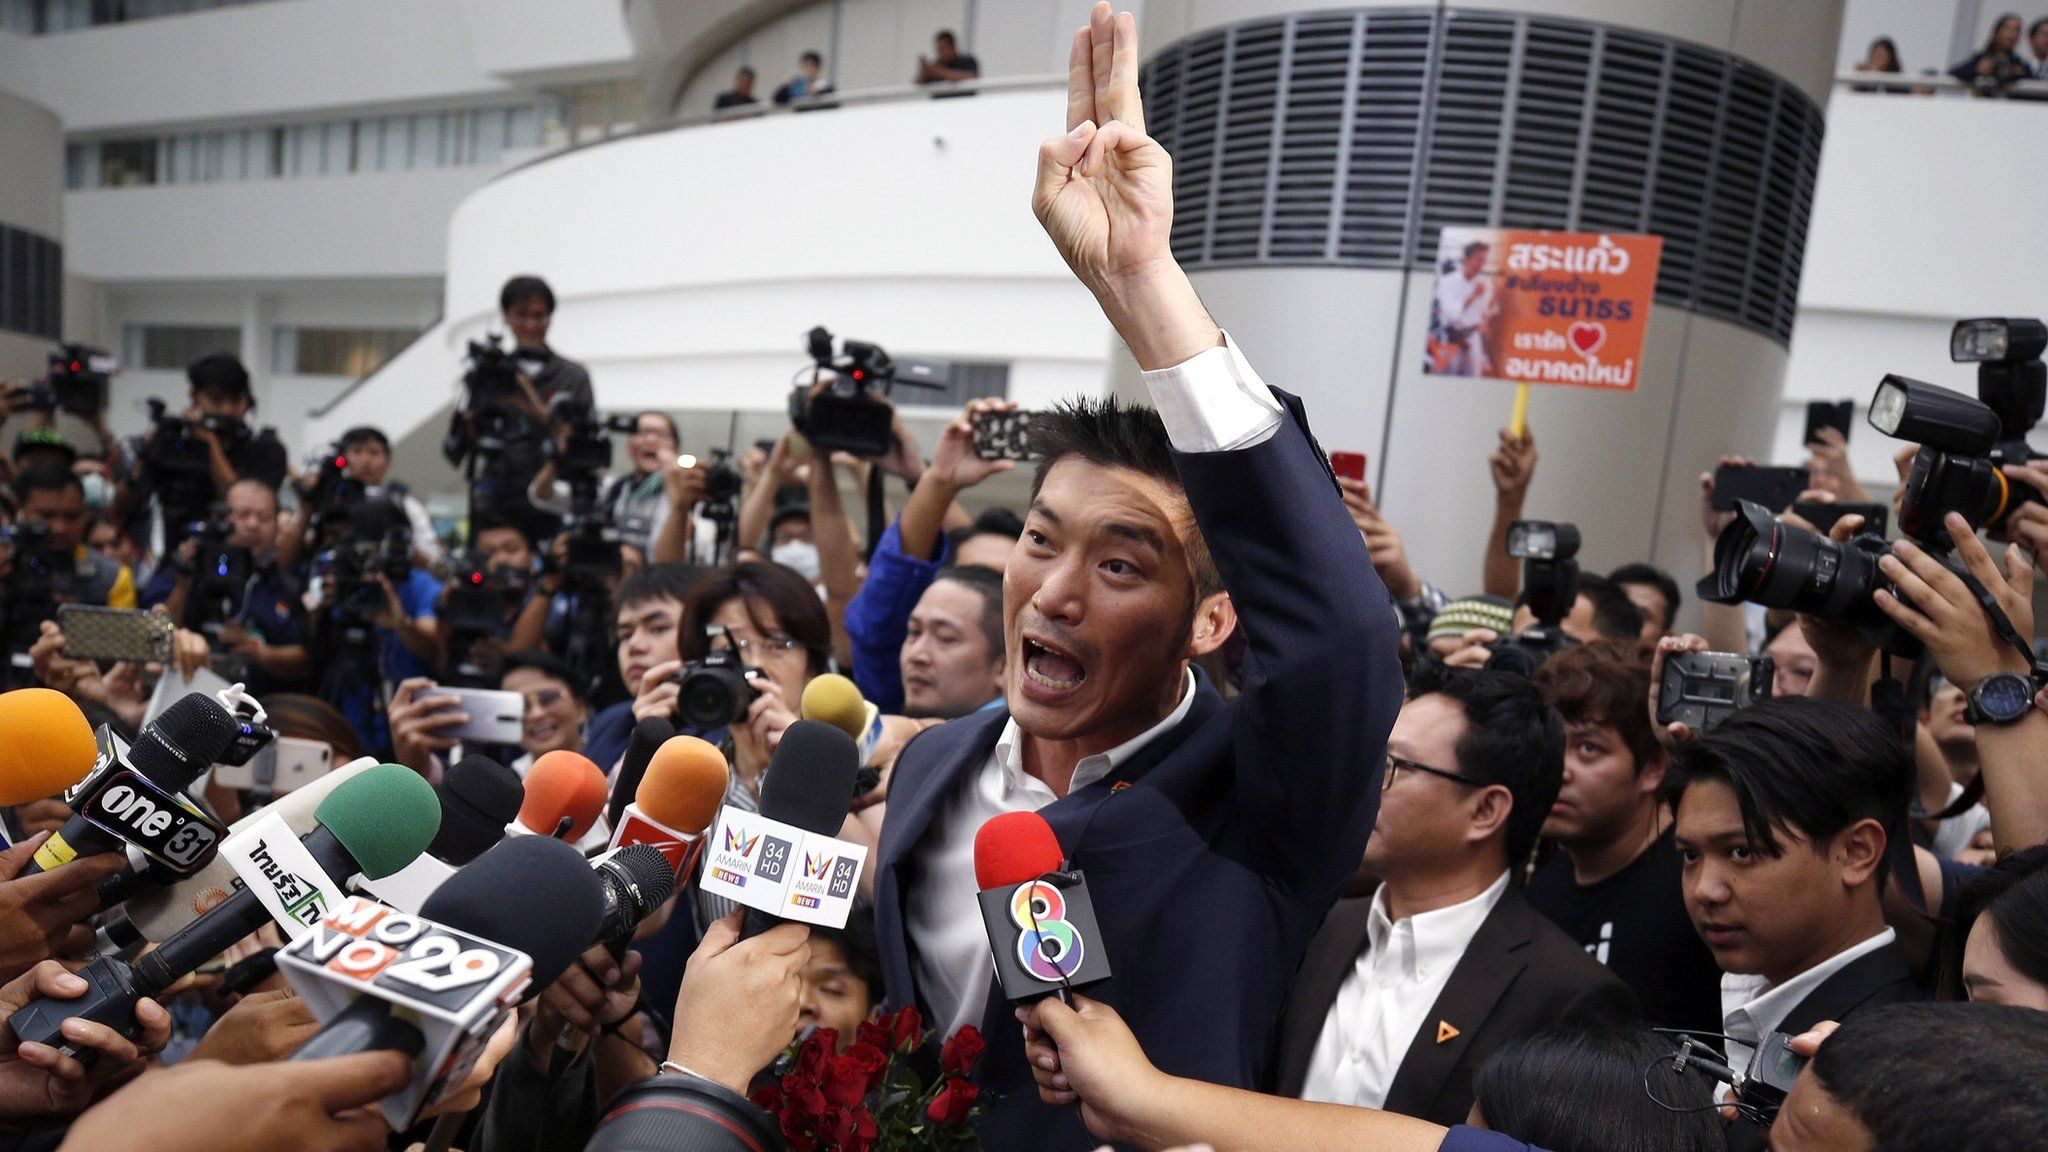 Future Forward Party leader Thanathorn Juangroongruangkit (C) speaks to supporters as he arrives to a verdict hearing at the Constitutional Court in Bangkok, Thailand, 20 November 2019.